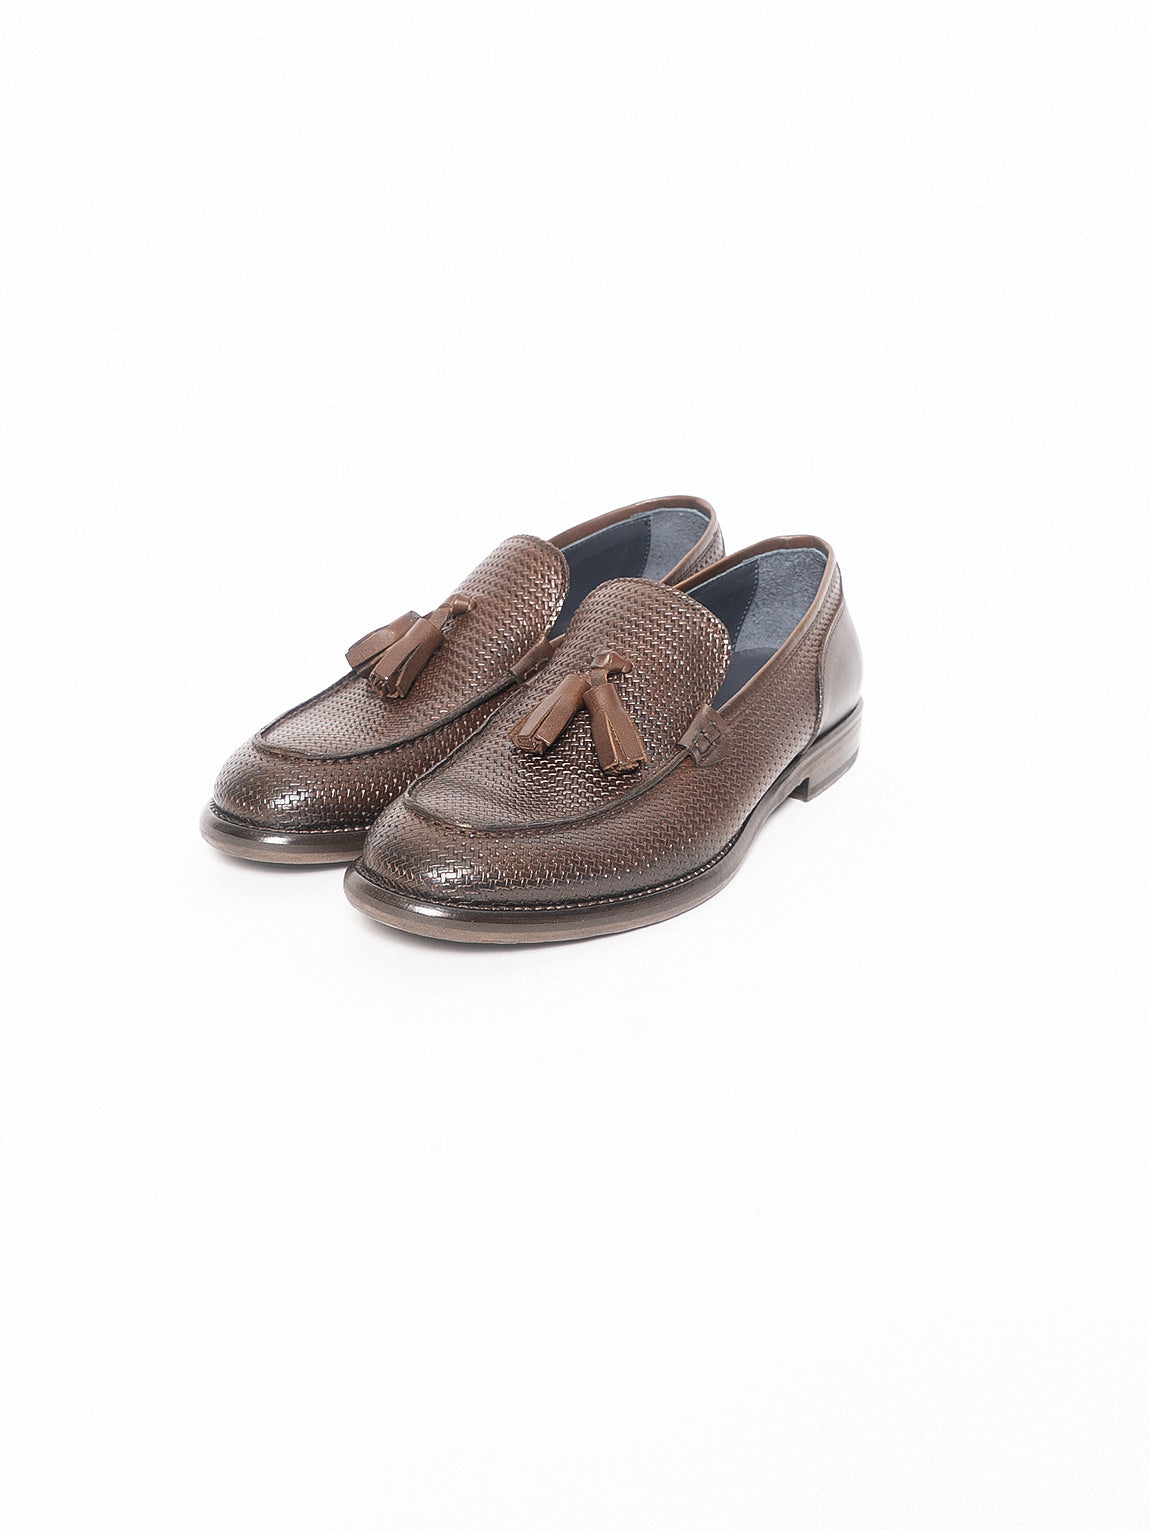 Loafers In Brown Braided Leather